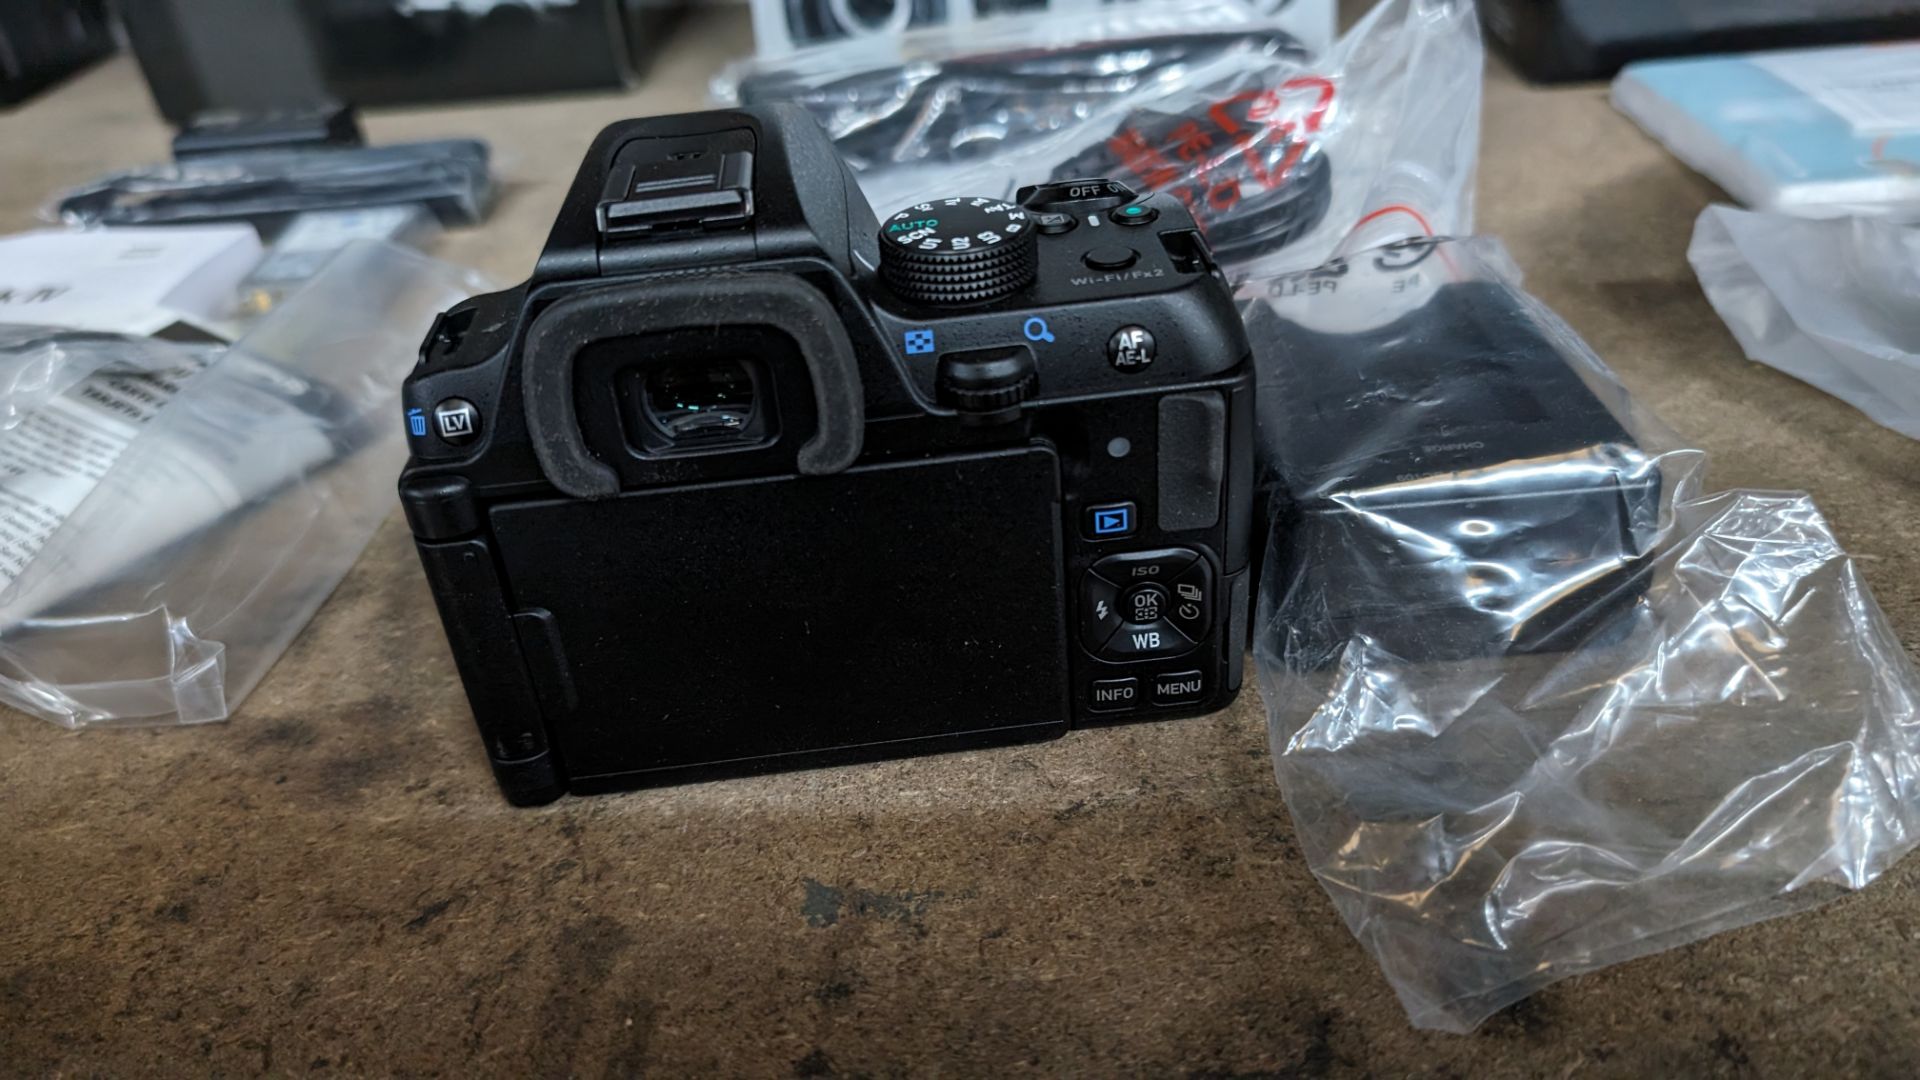 Pentax K-70 camera body, including strap, cable, battery and charger. NB: The box shows a lens, ho - Image 14 of 14